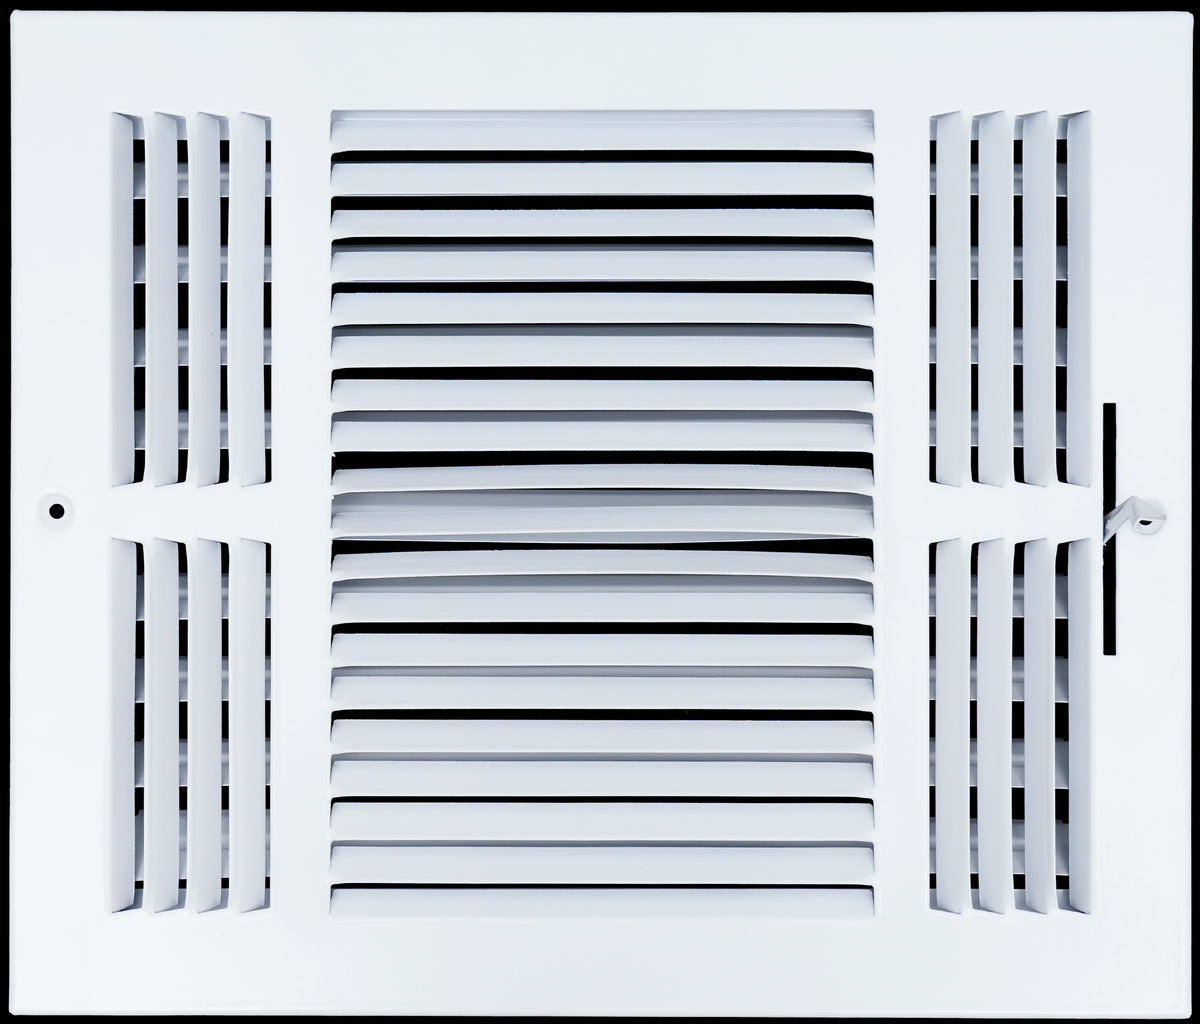 airgrilles 12 x 10 duct opening  -  3 way steel air supply diffuser for sidewall and ceiling hnd-asg-wh-3way-12x10 764613097559 - 1